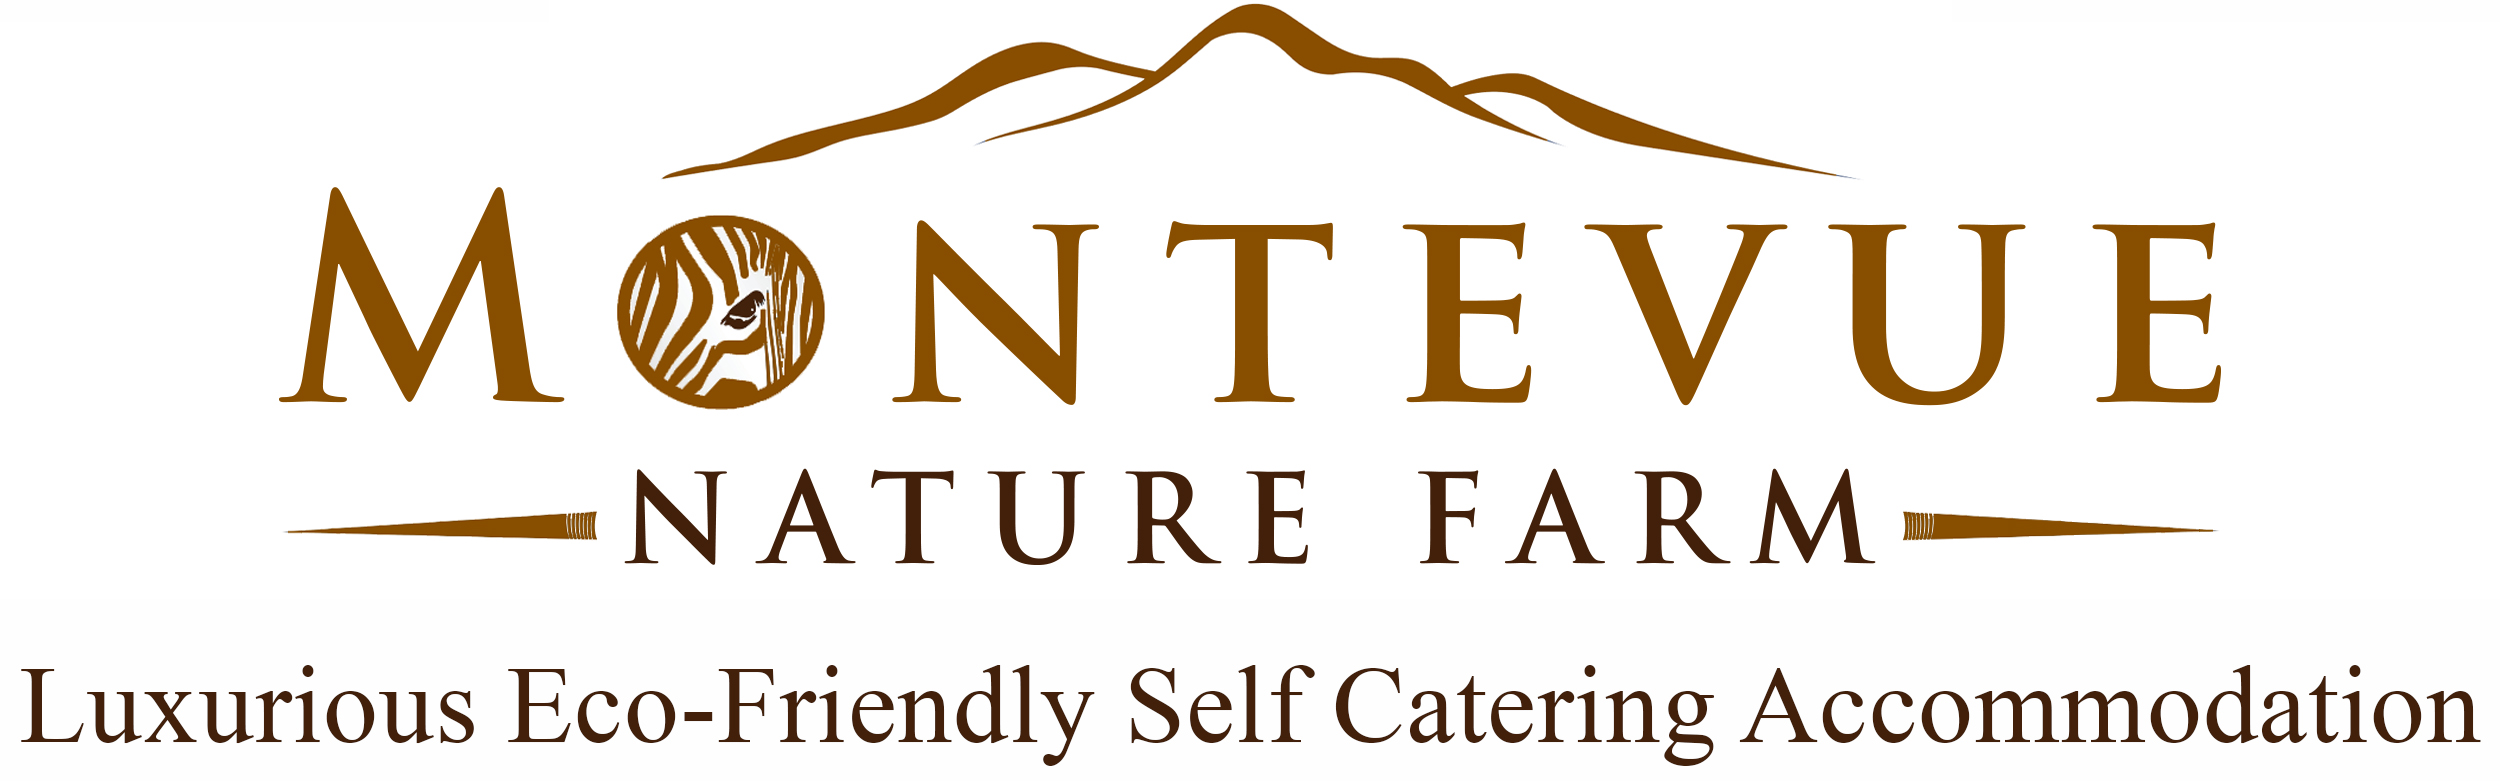 Montevue Nature Farm & Self Catering Accommodation @ Montagu Route 62